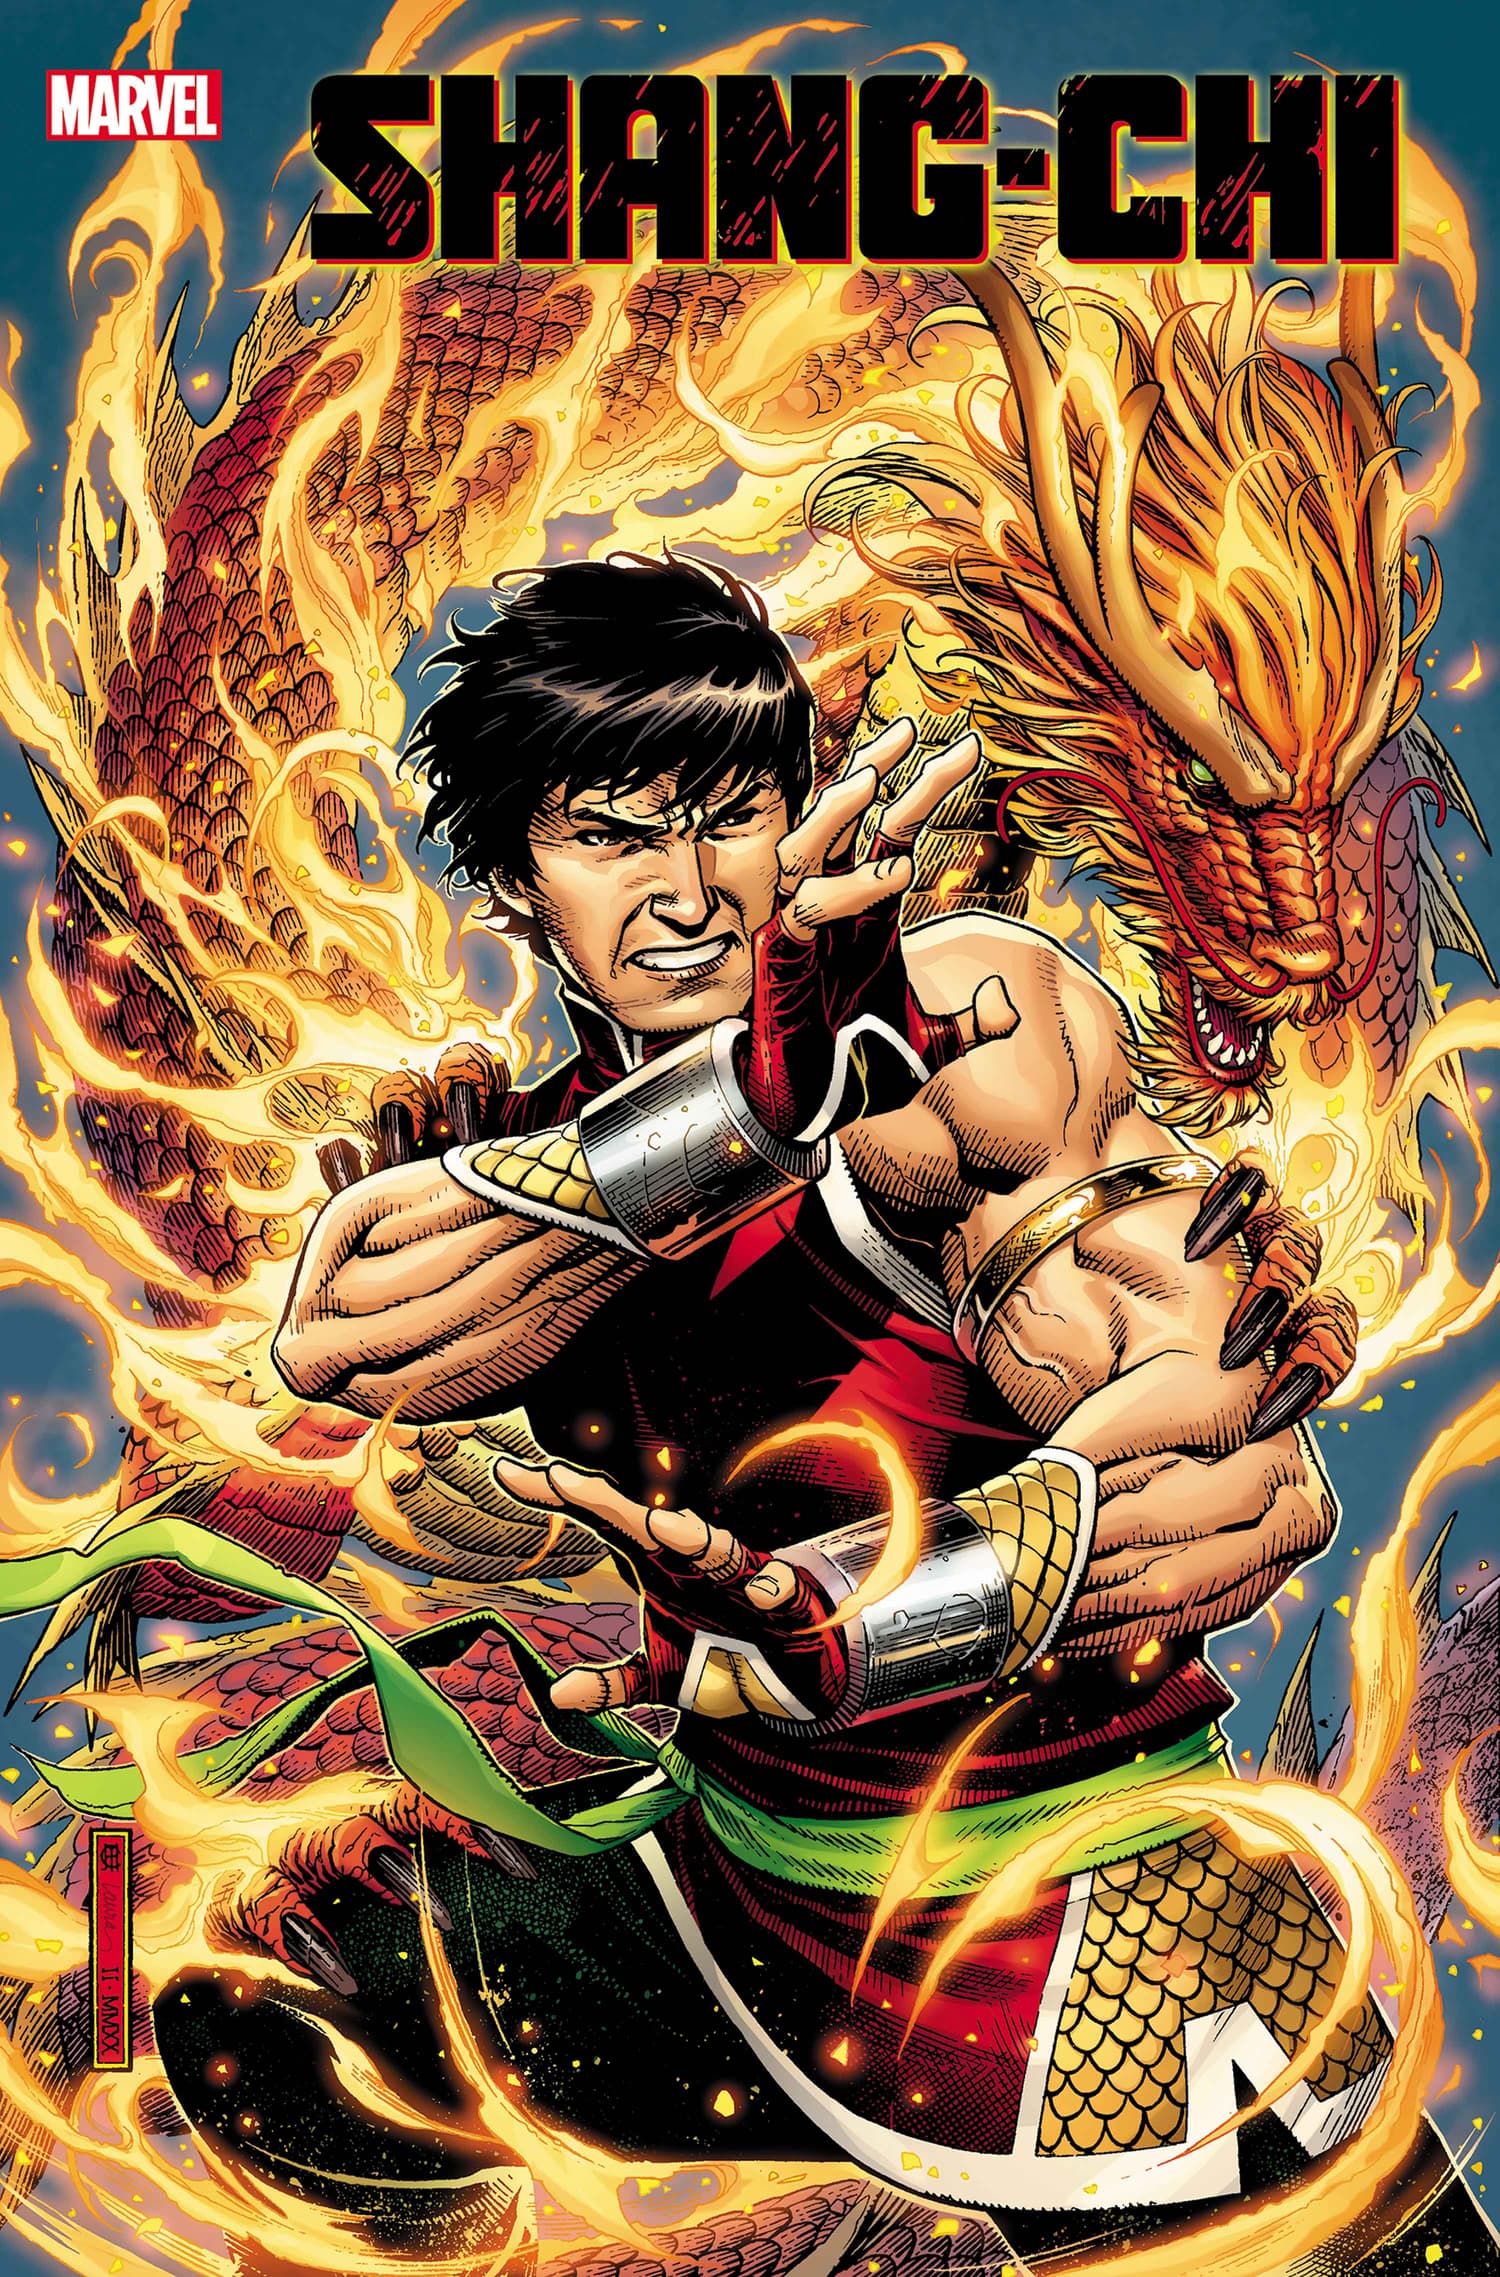 SHANG-CHI #1 cover by Jim Cheung